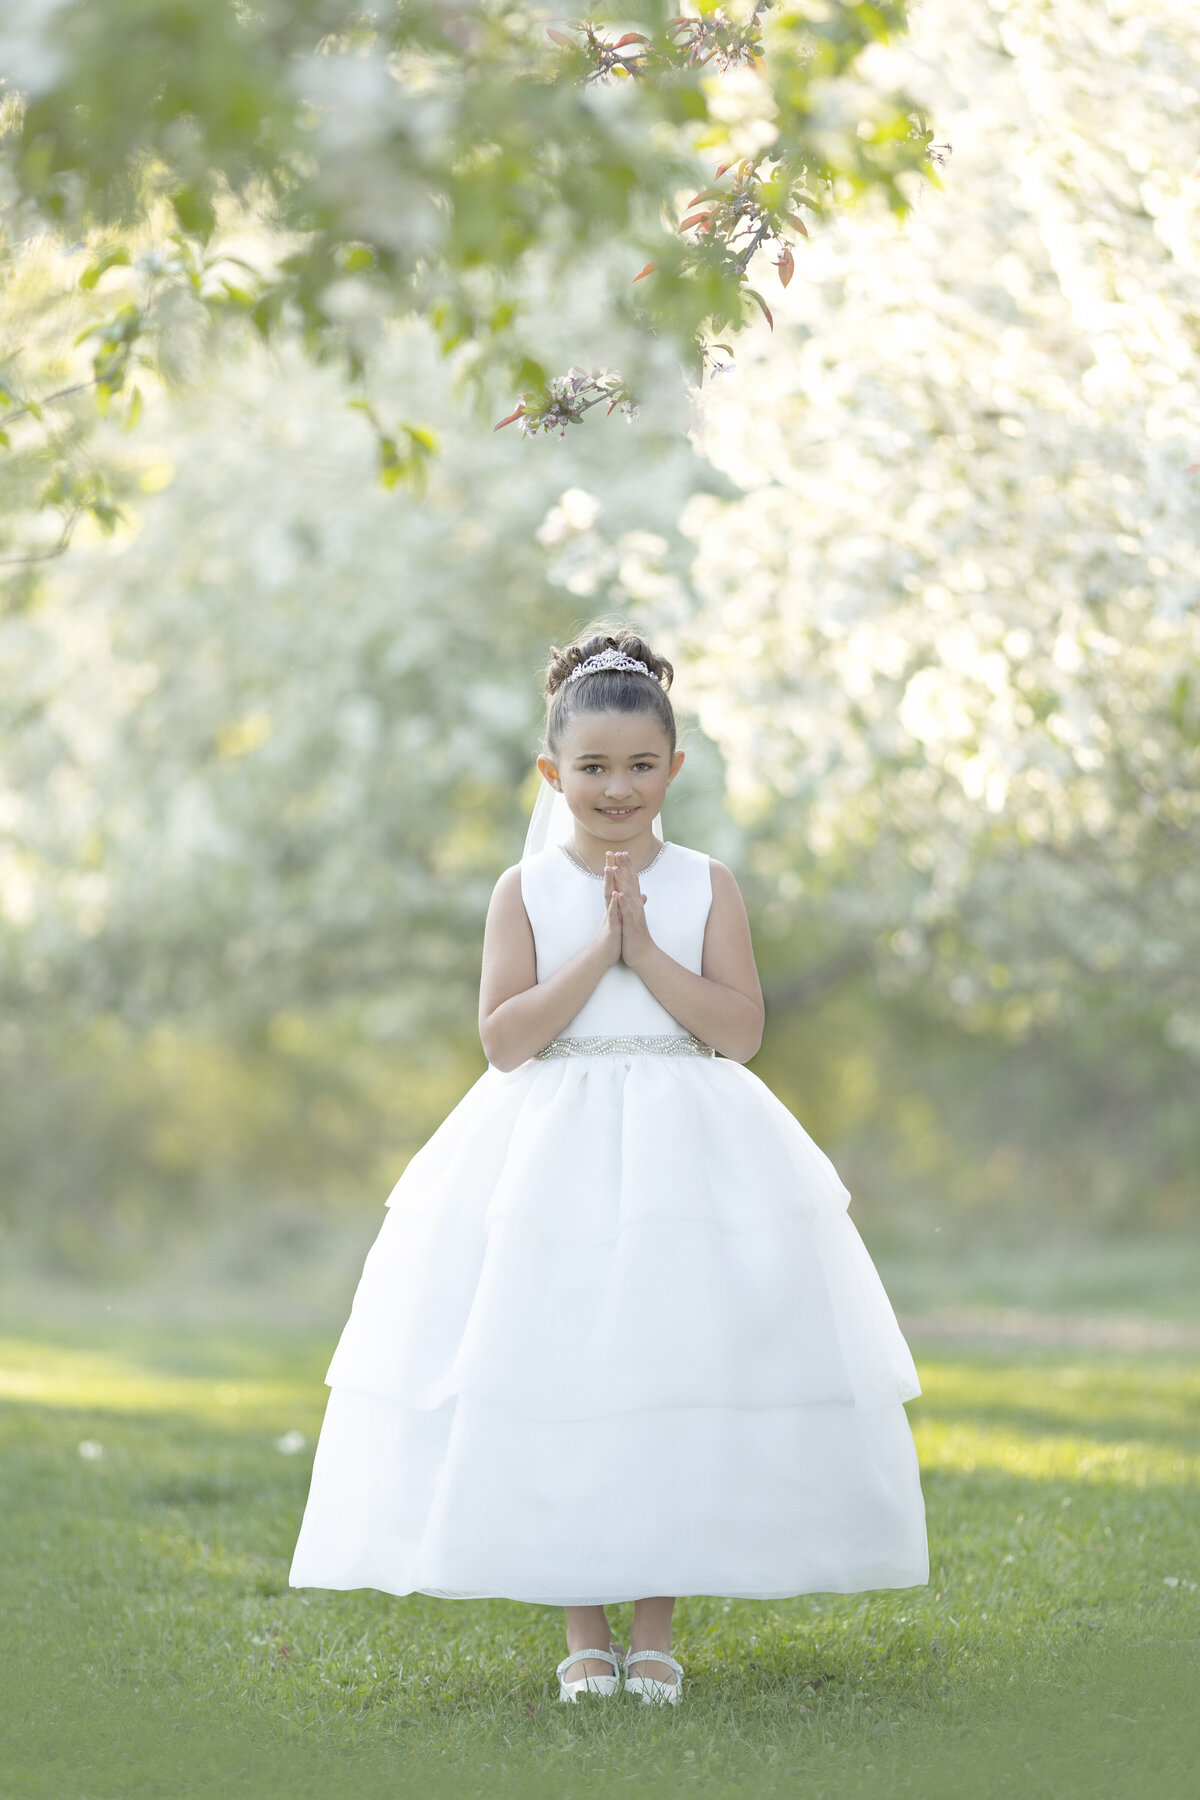 A young girl holds her hands in prayer in a white dress in a park at sunset